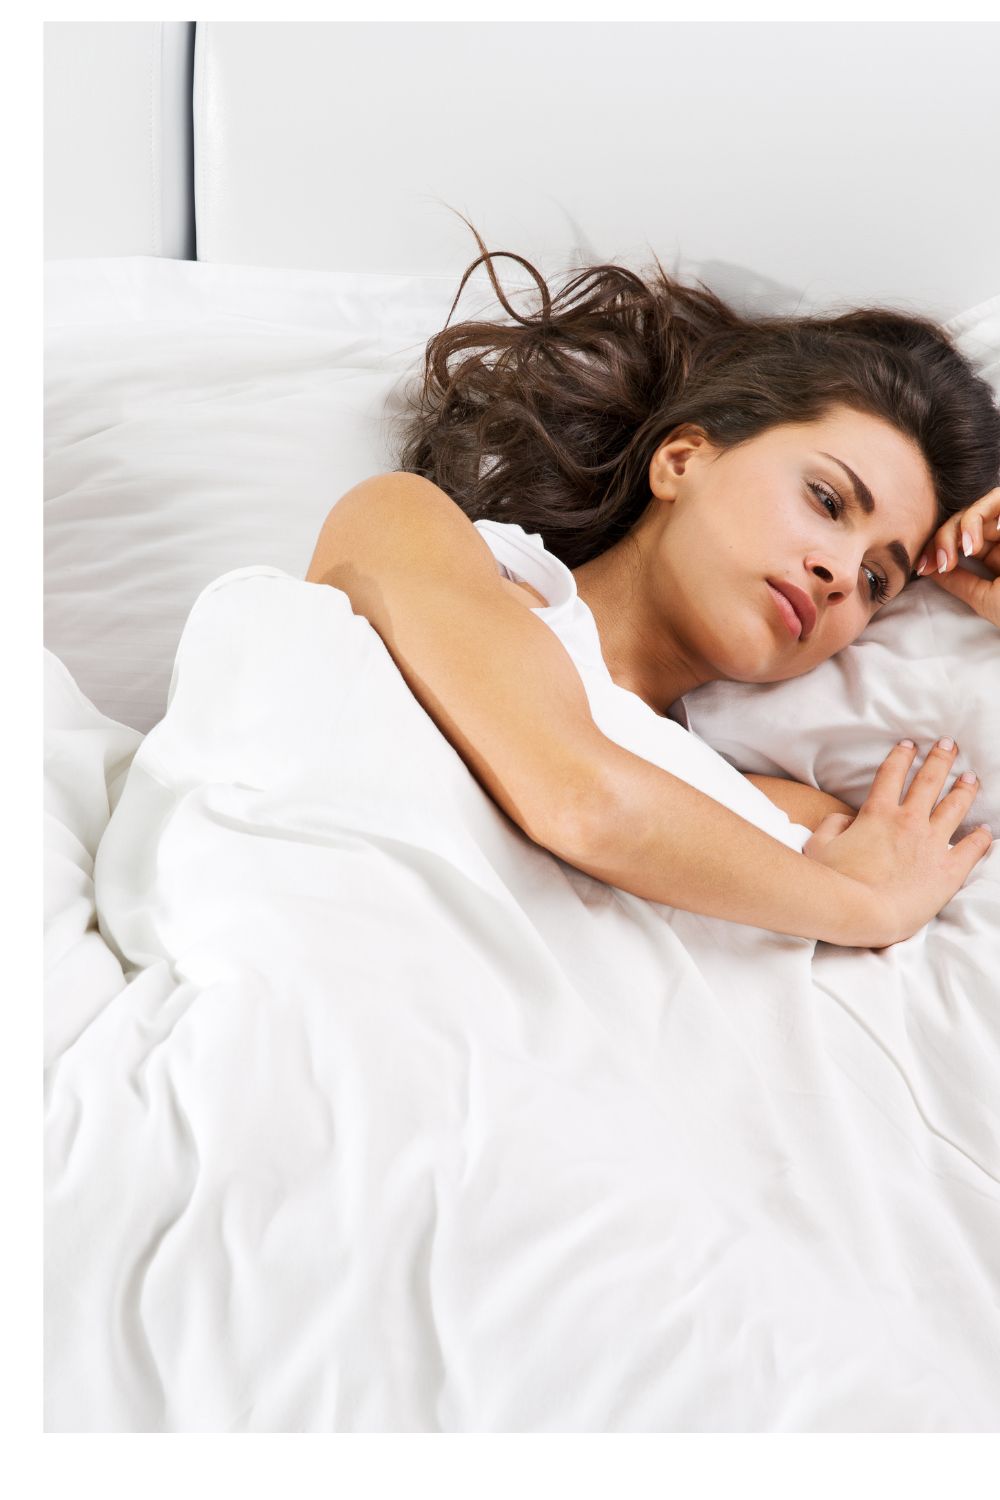 8 Powerful Signs Your Wife Is Bored In Bed